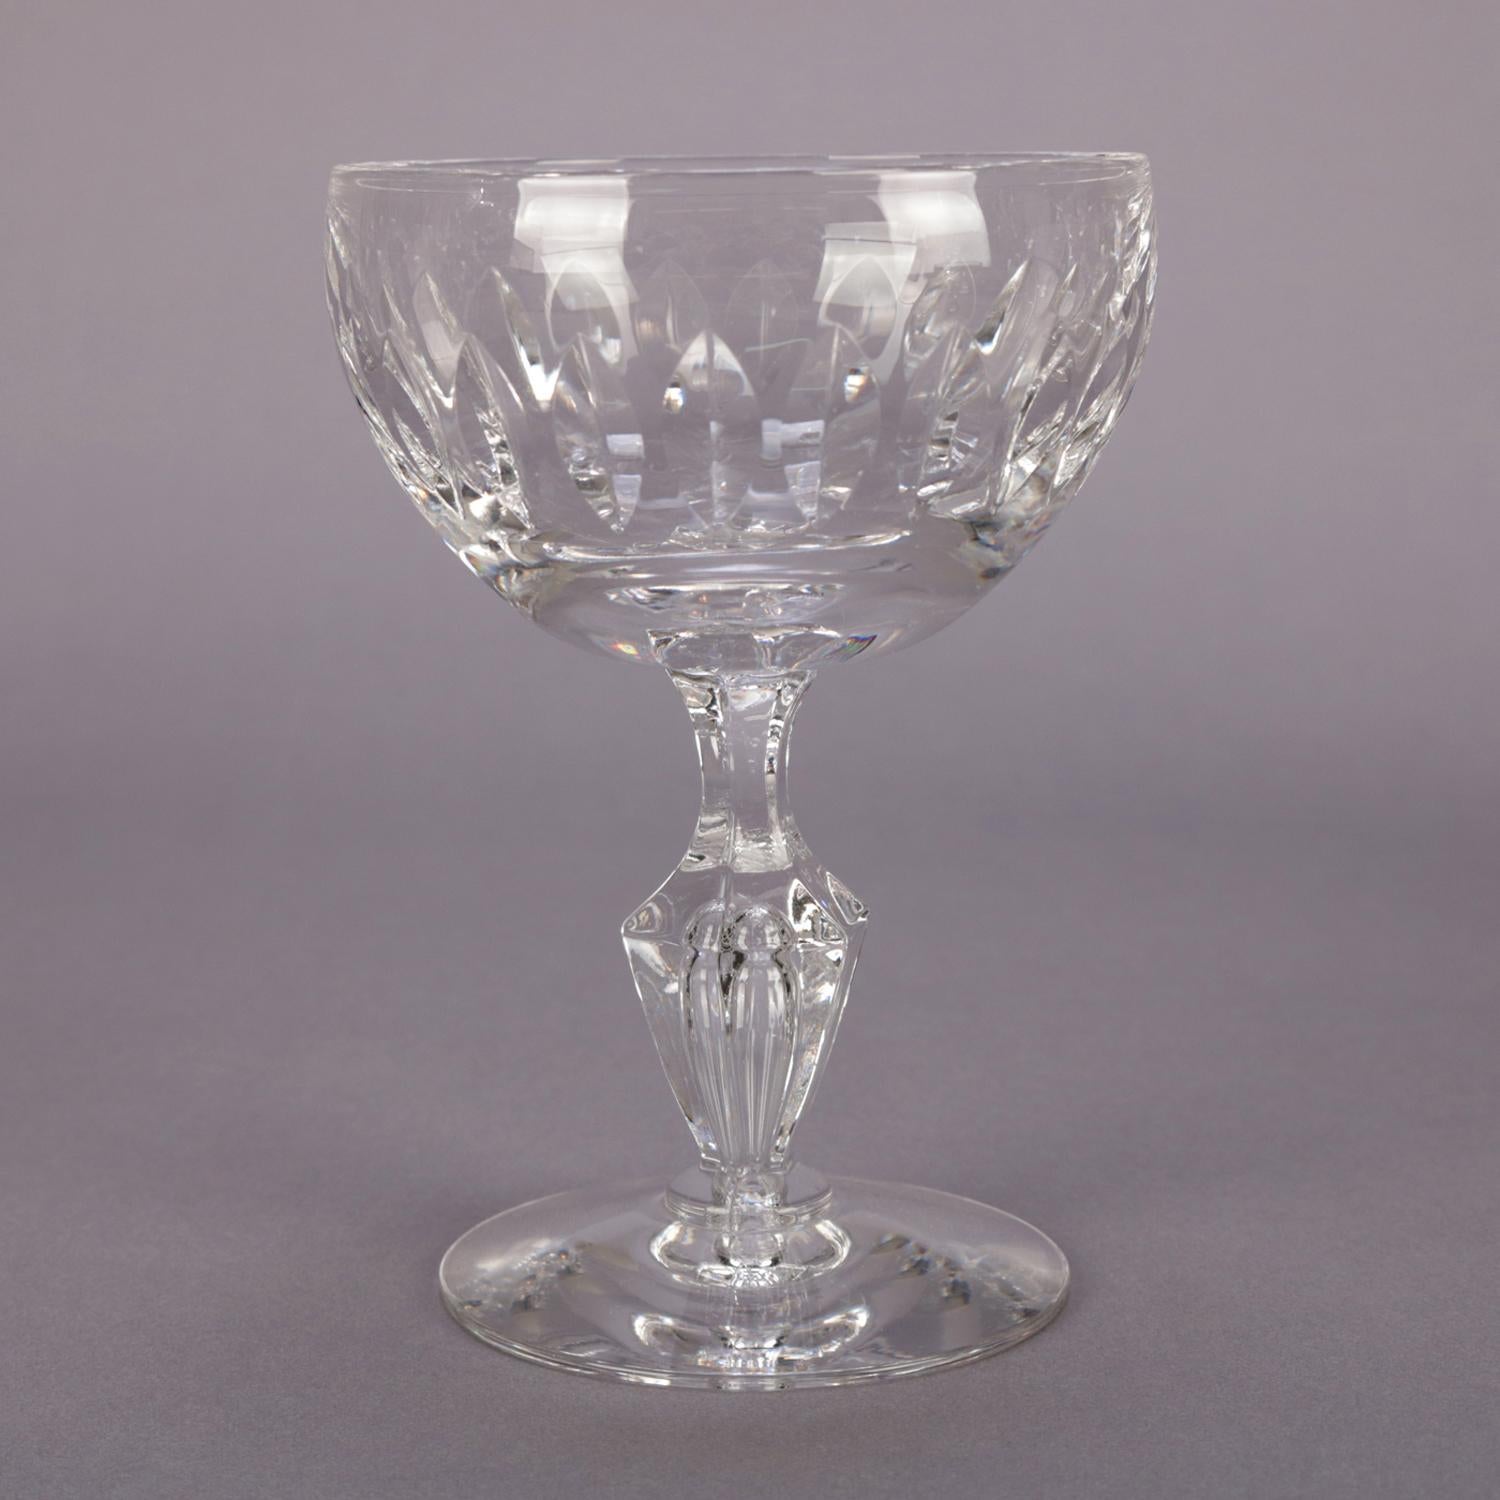 Set of 8 crystal sherbet glasses feature bowl with lower repeating stylized leaf pattern and raised on urn form stems, 20th century


Measures - 5